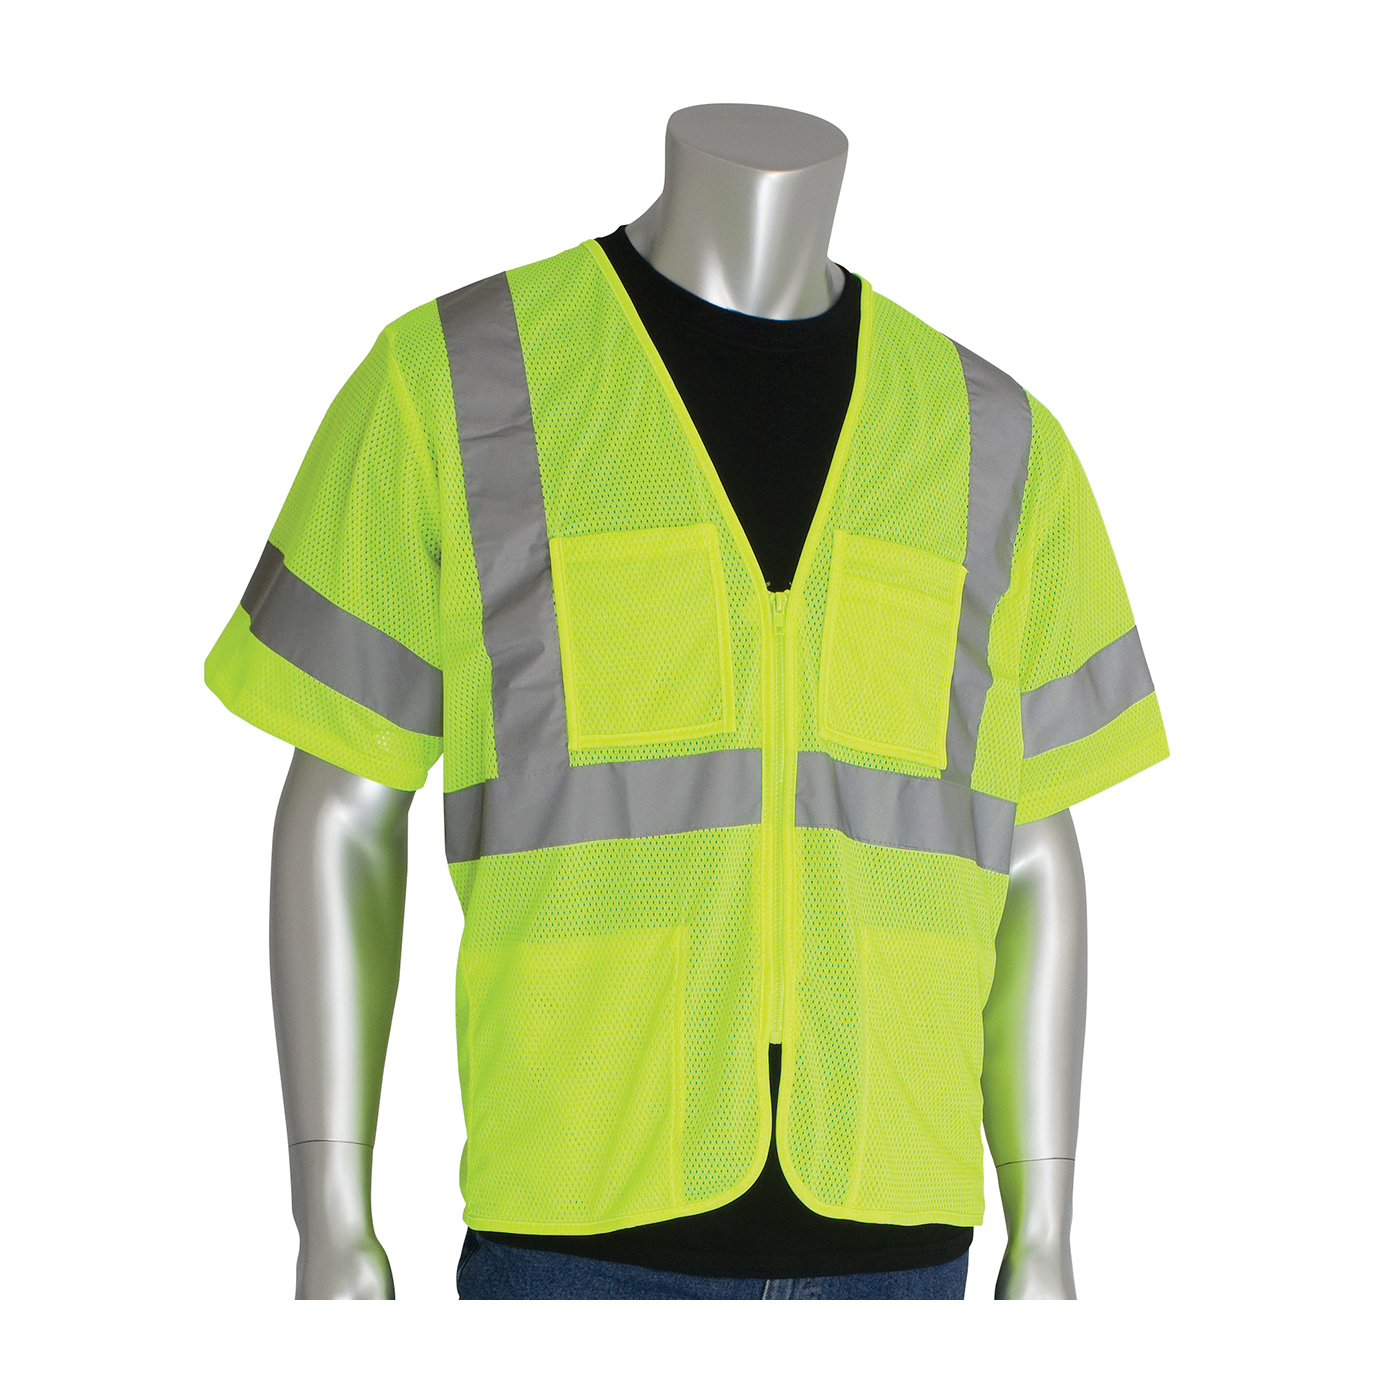 PIP® 303-MVGZ4P-LY/3X Safety Vest, 3XL, Hi-Viz Lime Yellow, Polyester Mesh, Zipper Closure, 4 Pockets, ANSI Class: Class 3, Specifications Met: ANSI 107 Type R